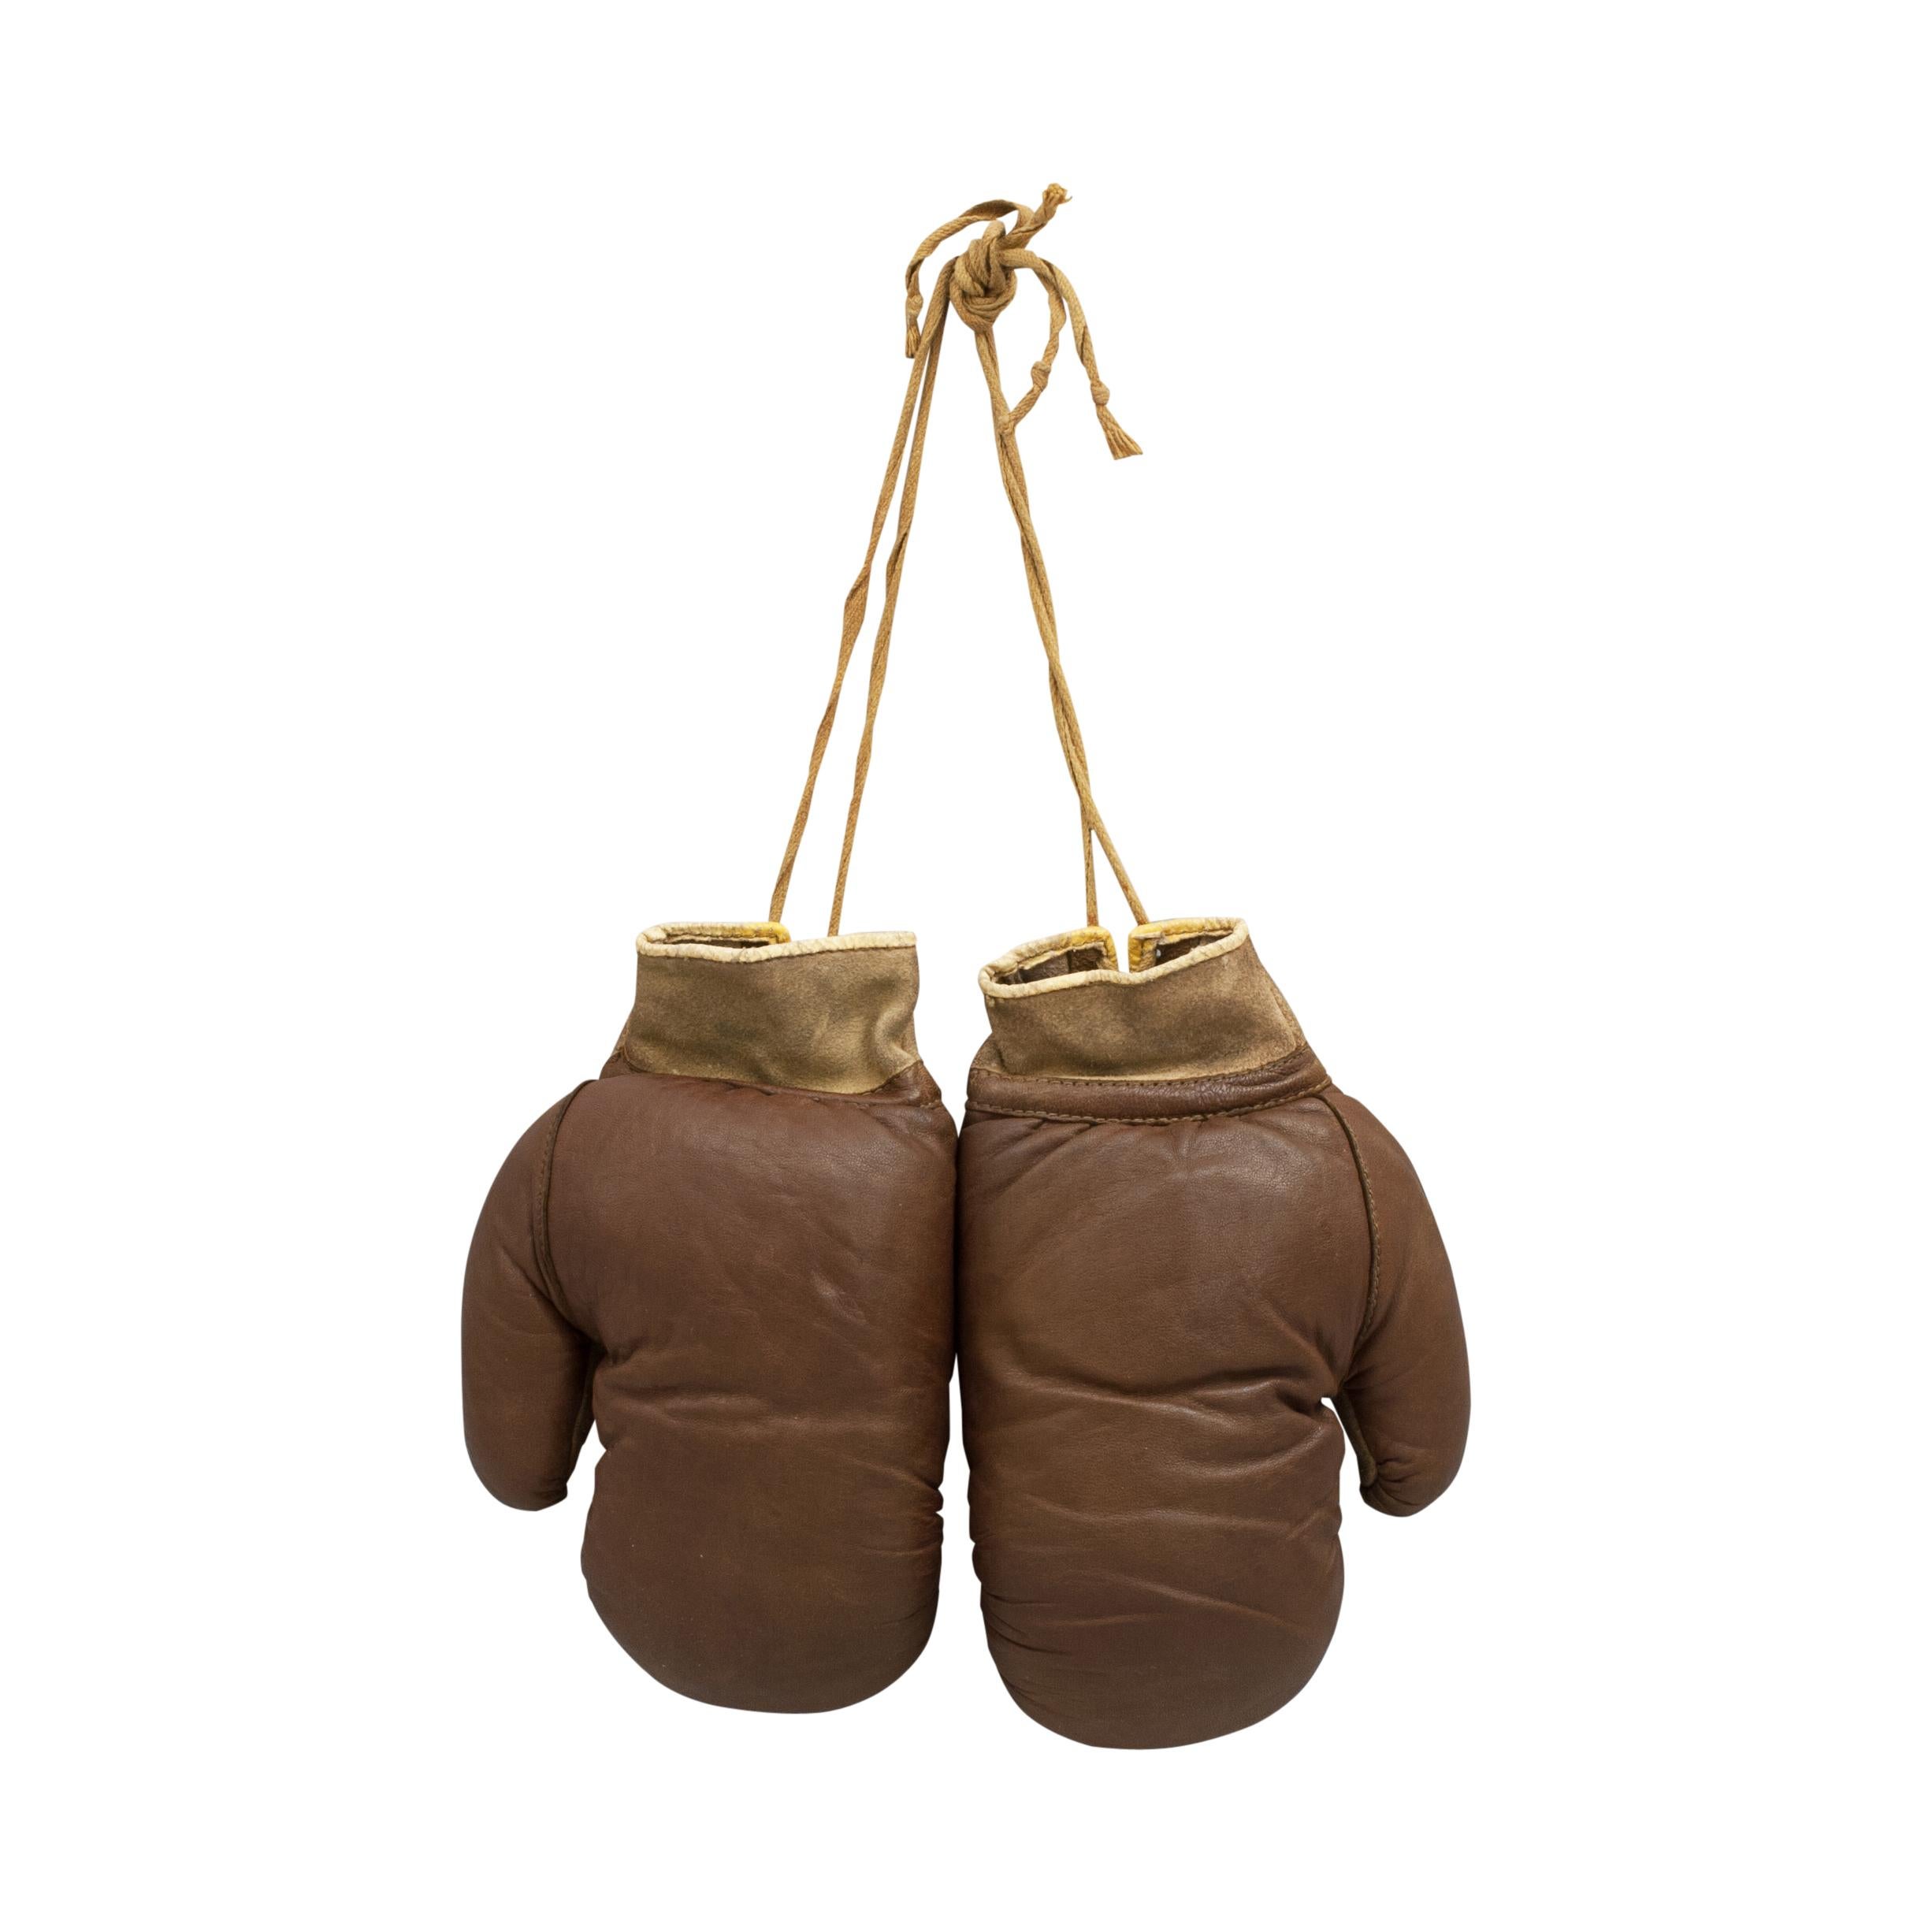 A charming pair of two-tone leather boxing gloves. These gloves are with laced palms, the leather having a nice used patina about them and are in a good condition. A lovely pair of decorative vintage gloves.
  
  